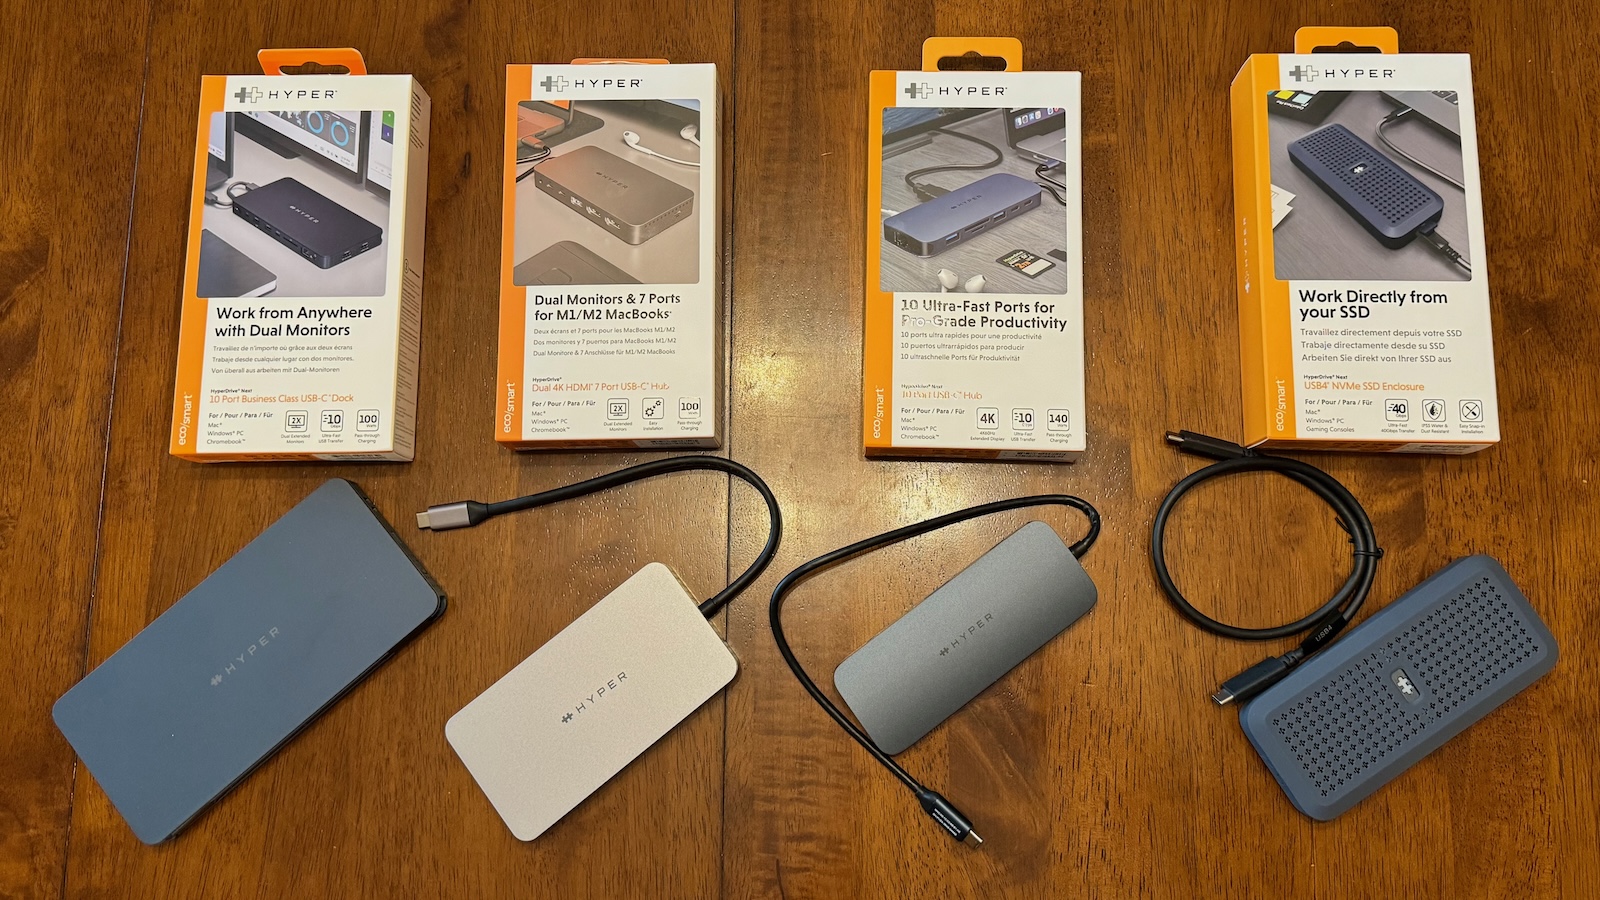 Review: Hyper's USB Hubs and SSD Enclosure Offer an Array of Connectivity Options